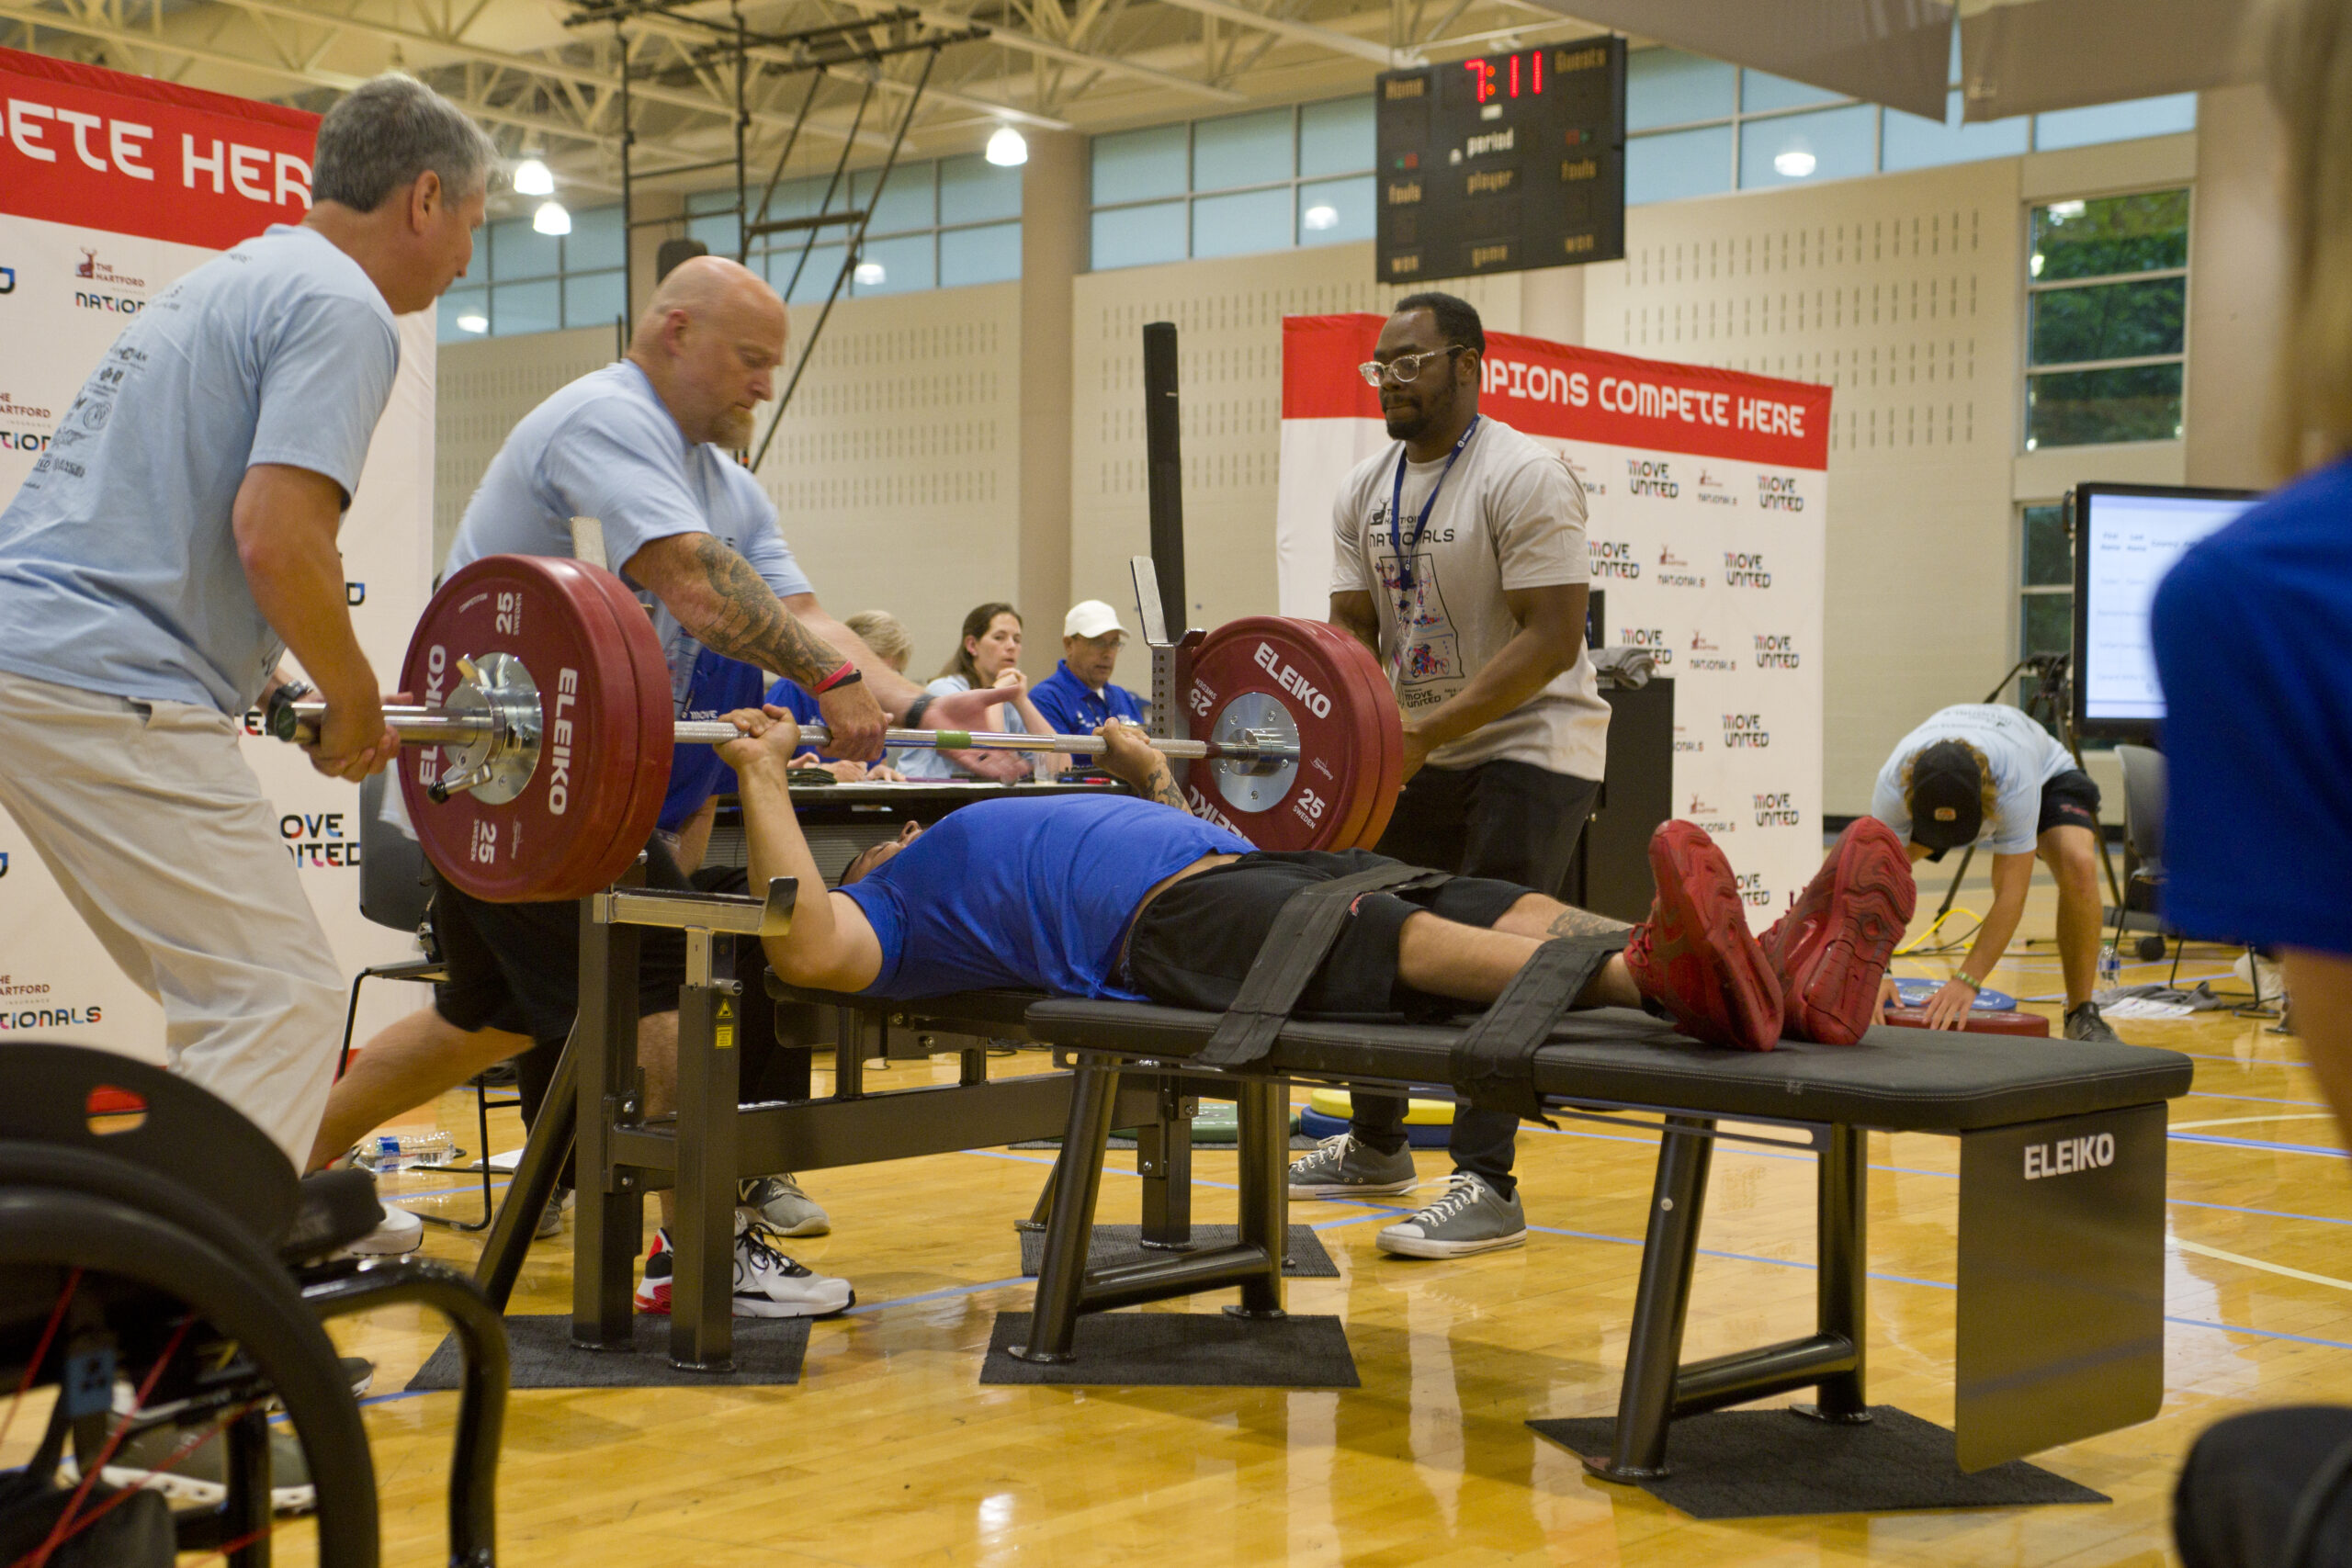 Powerlifting athlete laid down and strapped on bench. Bar in press position. Three volunteers assisting.